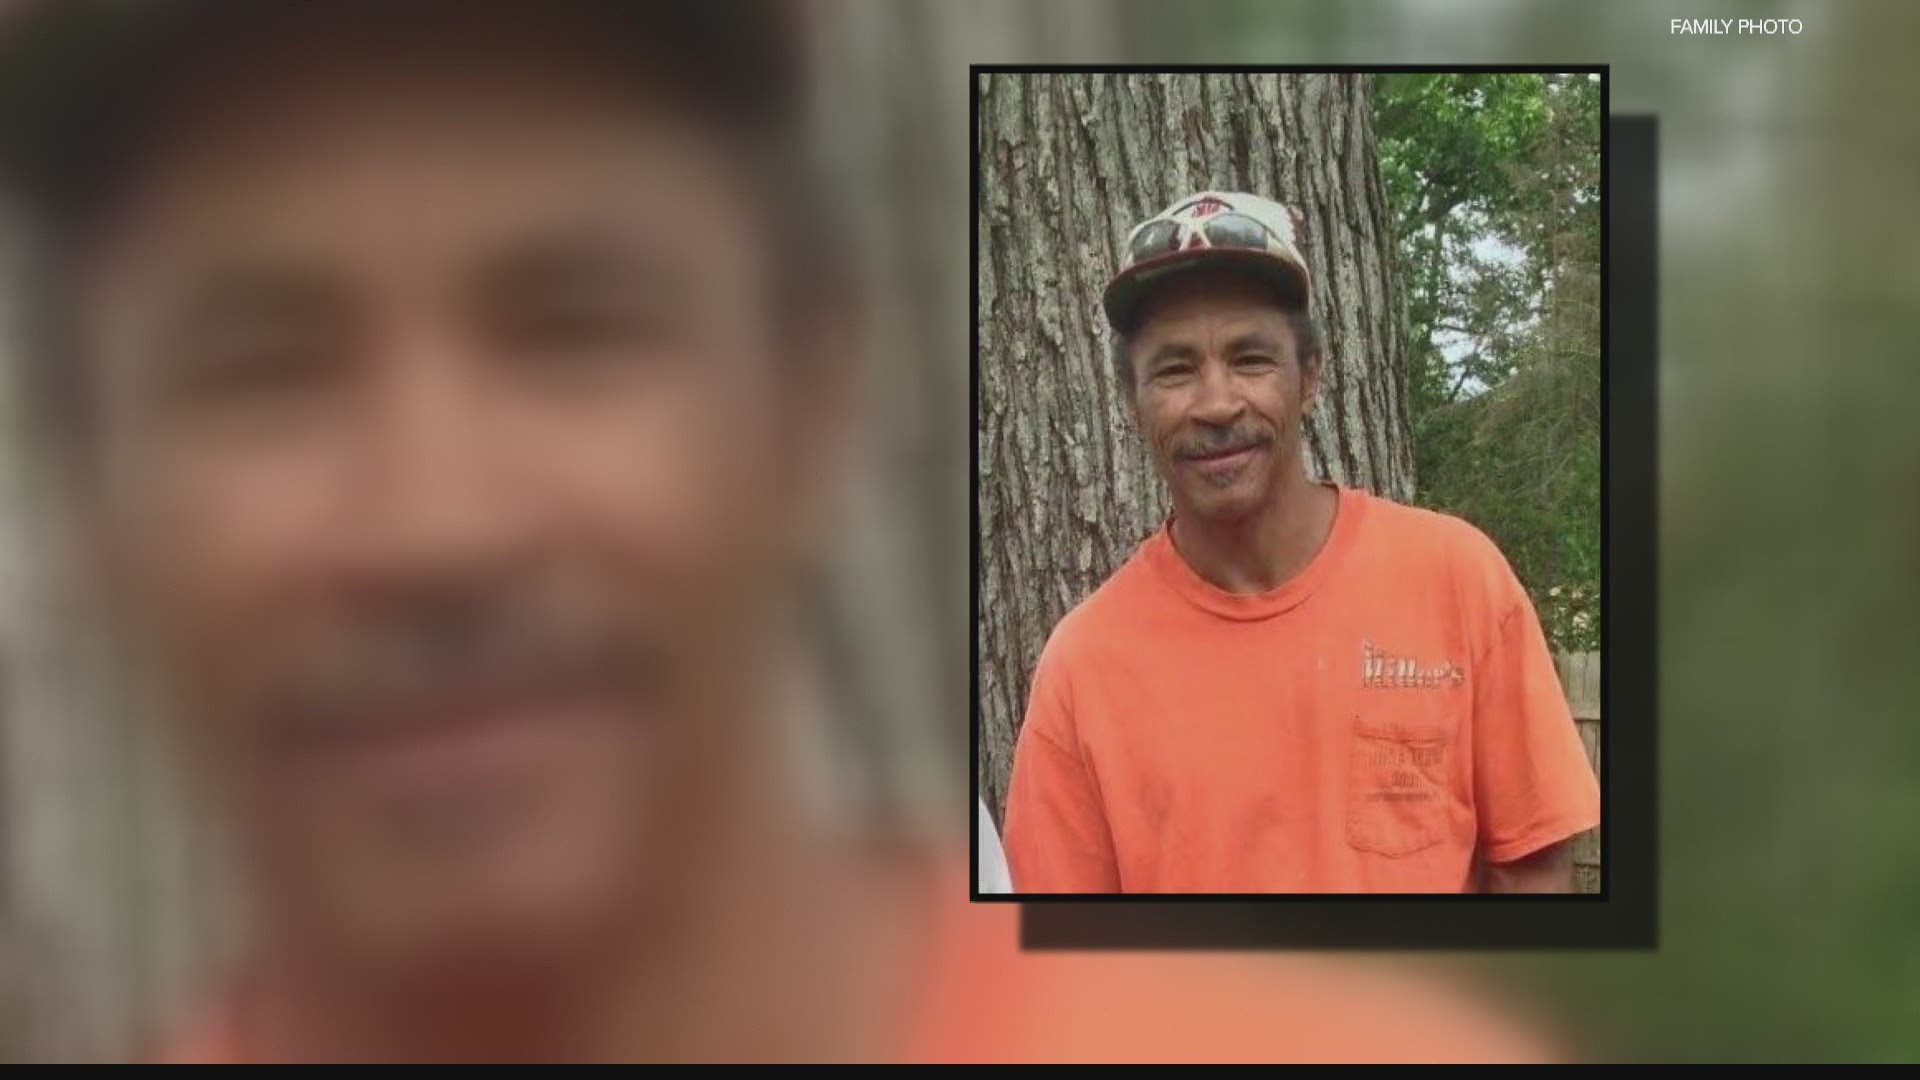 Ronald McGee died after being struck by two cars at 38th & Emerson.